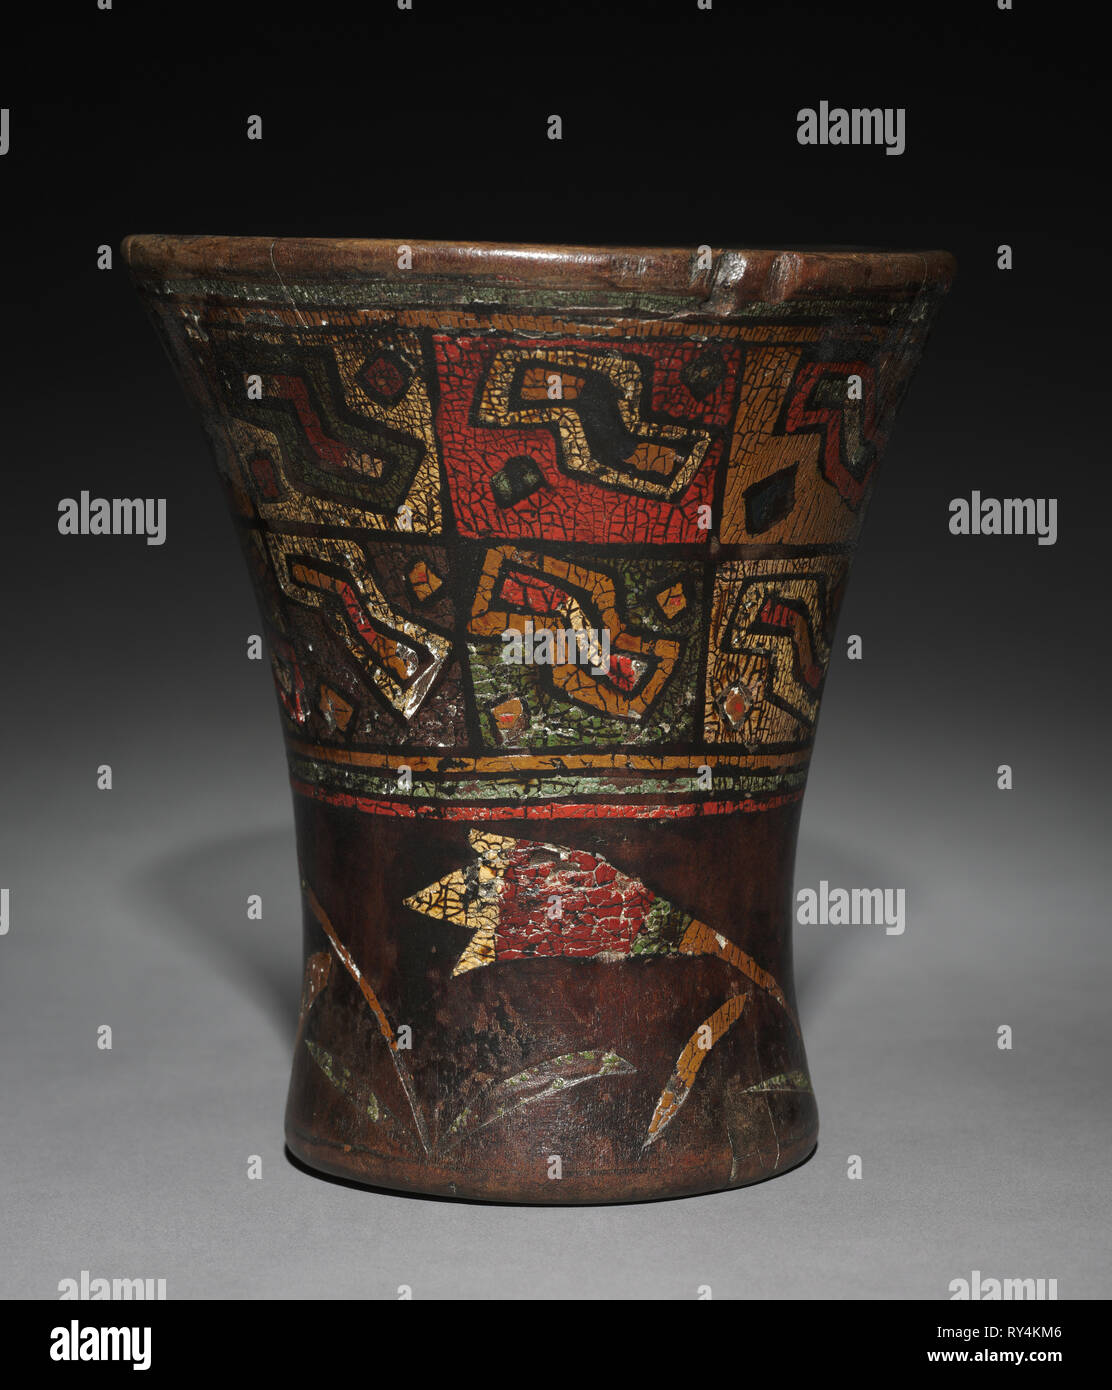 Kero (Waisted Cup), after 1550. Peru, Colonial Inka style, 16th century. Wood, inlaid pigments; diameter of mouth: 17.8 x 16 cm (7 x 6 5/16 in.); overall: 17.8 cm (7 in Stock Photo